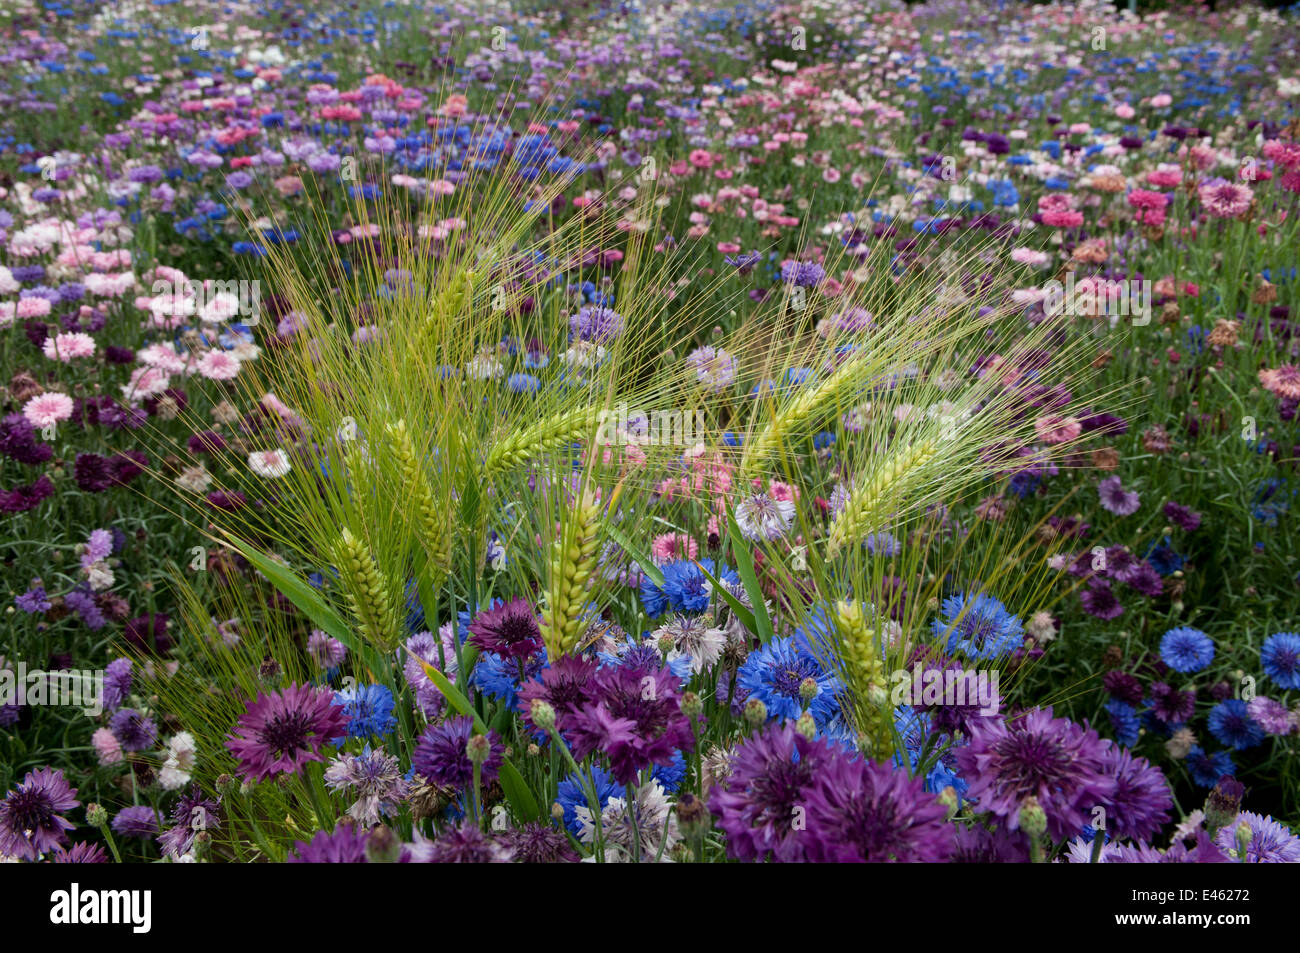 Mixed dianthus flowers (Dianthus sp) in garden with wild Barley plants growing as weeds, Val de Loire, France, June Stock Photo